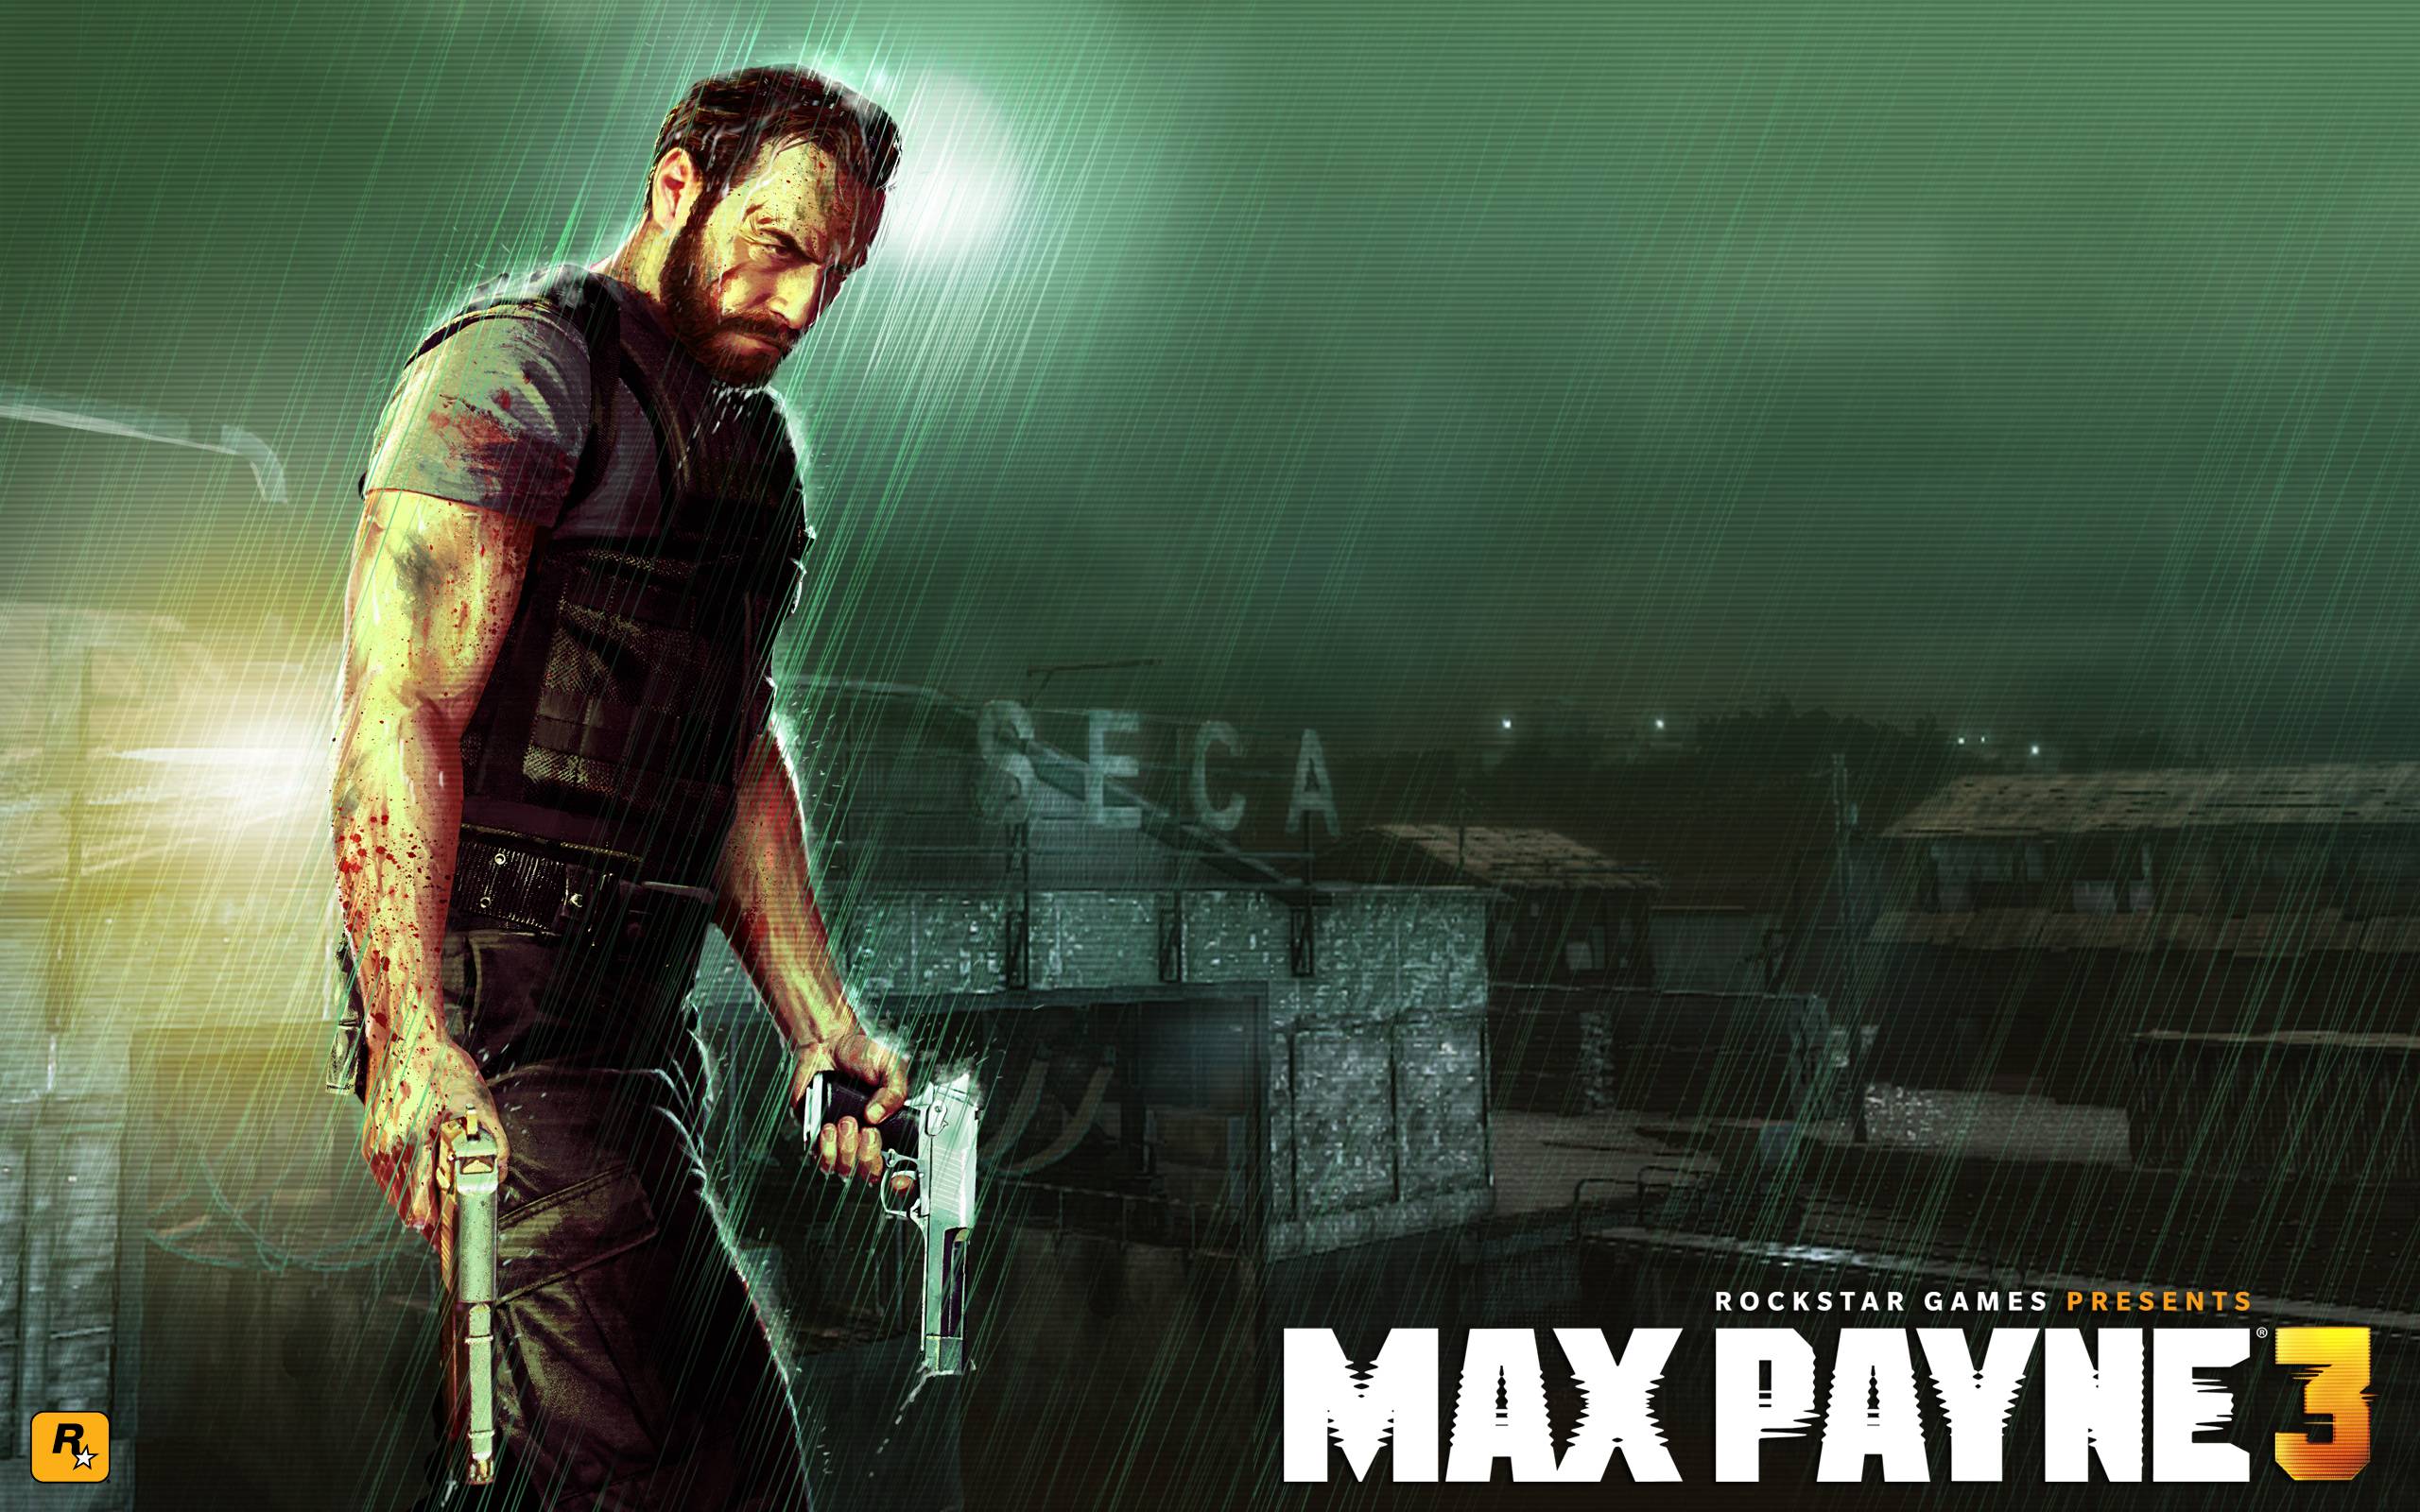 Max Payne Wallpapers - Wallpaper Cave2560 x 1600